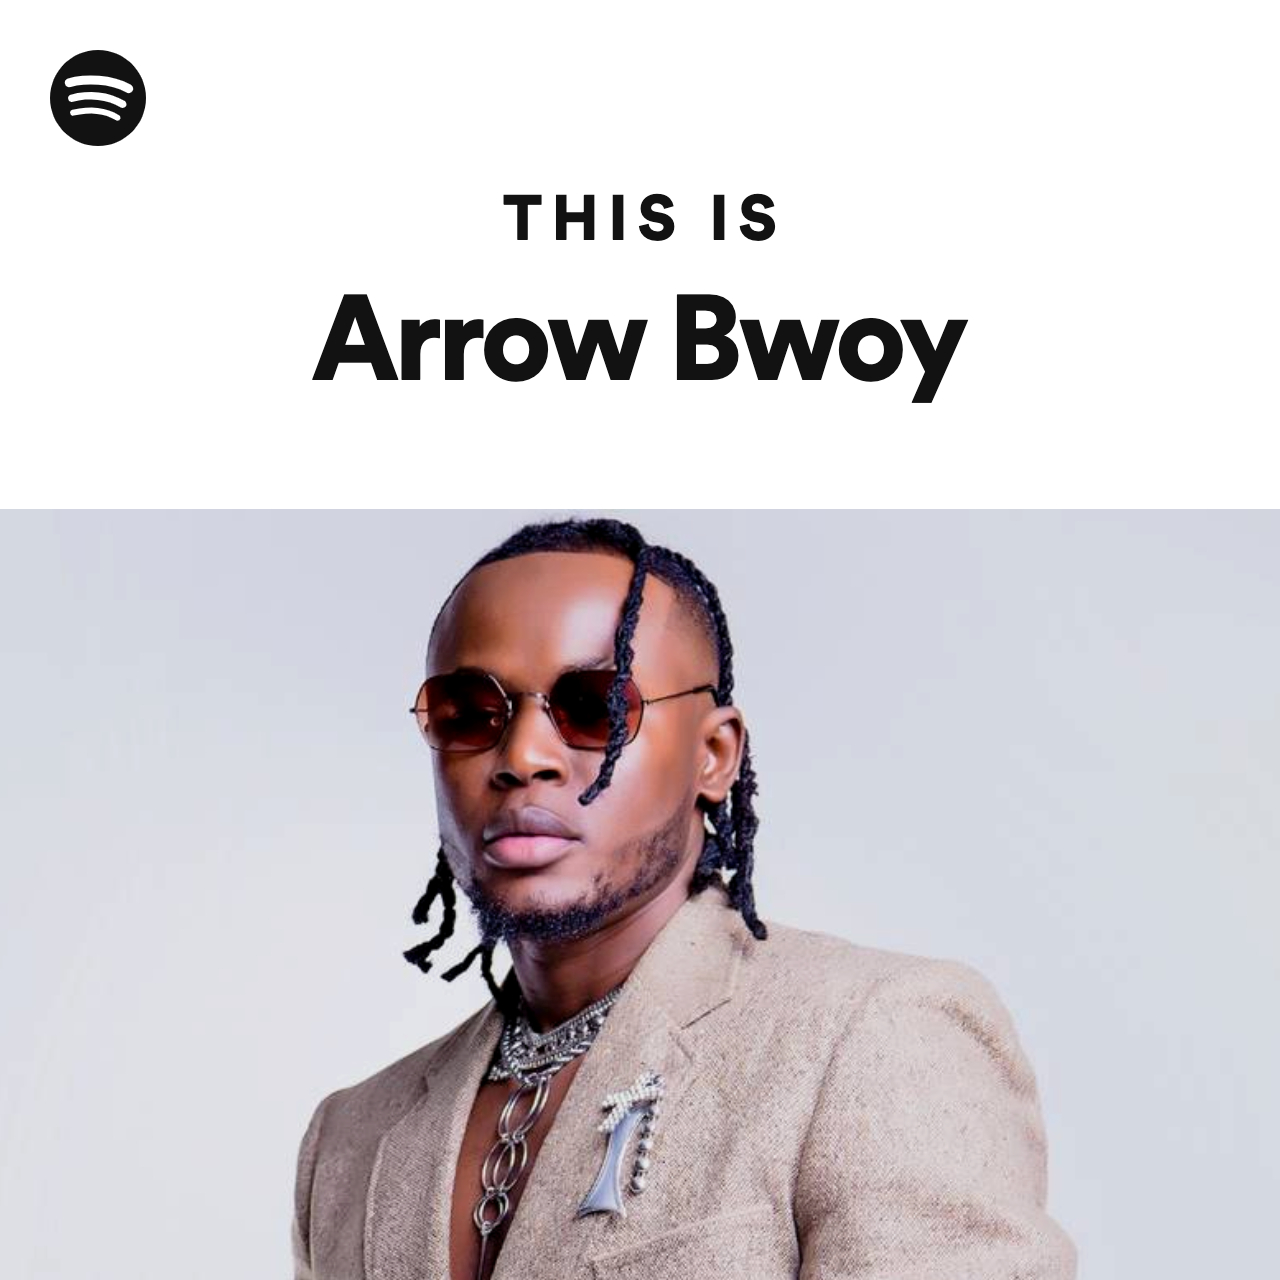 This Is Arrow Bwoy